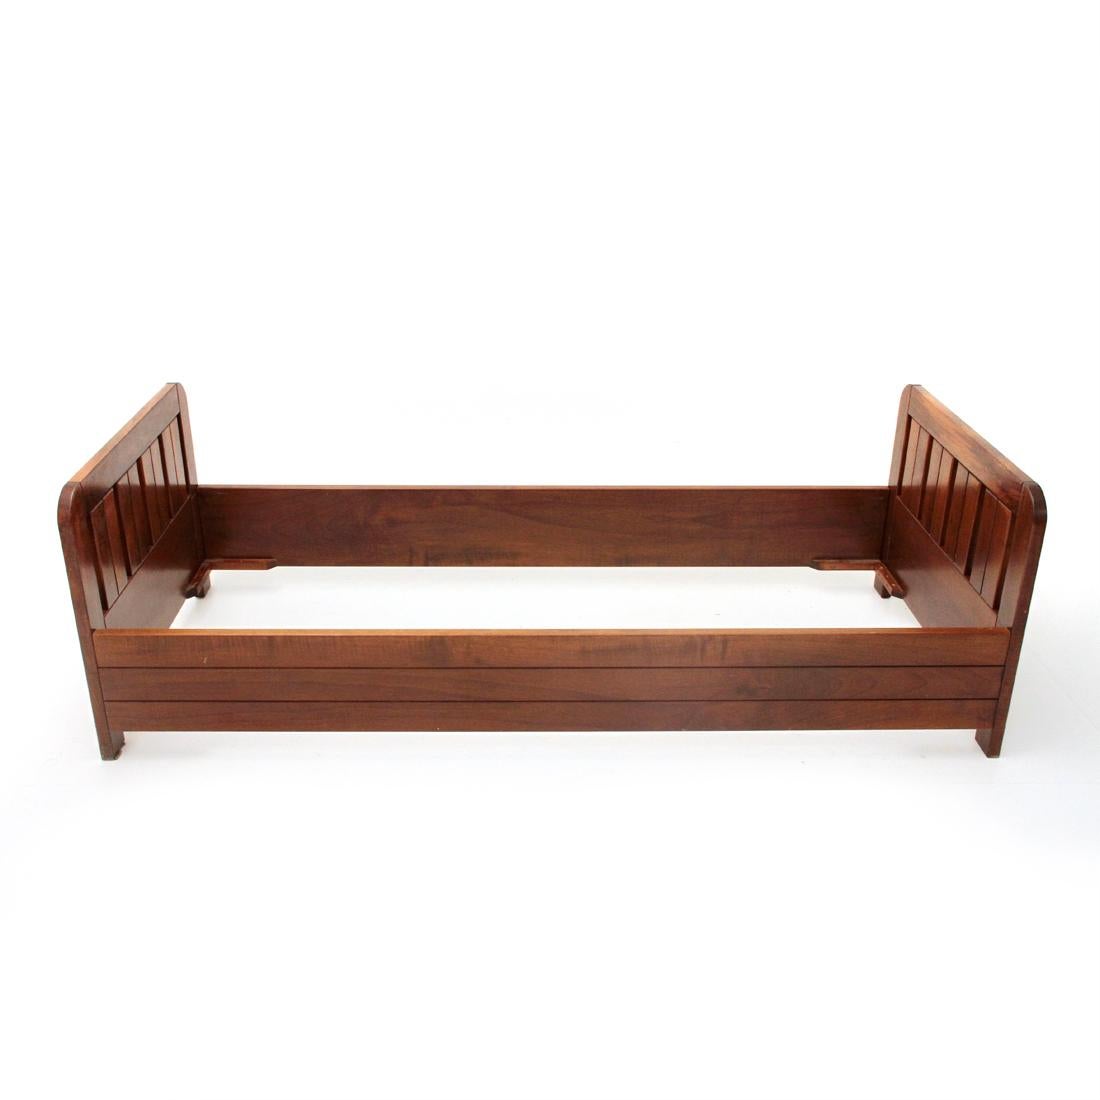 Mid-20th Century Italian Midcentury Wooden Single Bed, 1960s For Sale